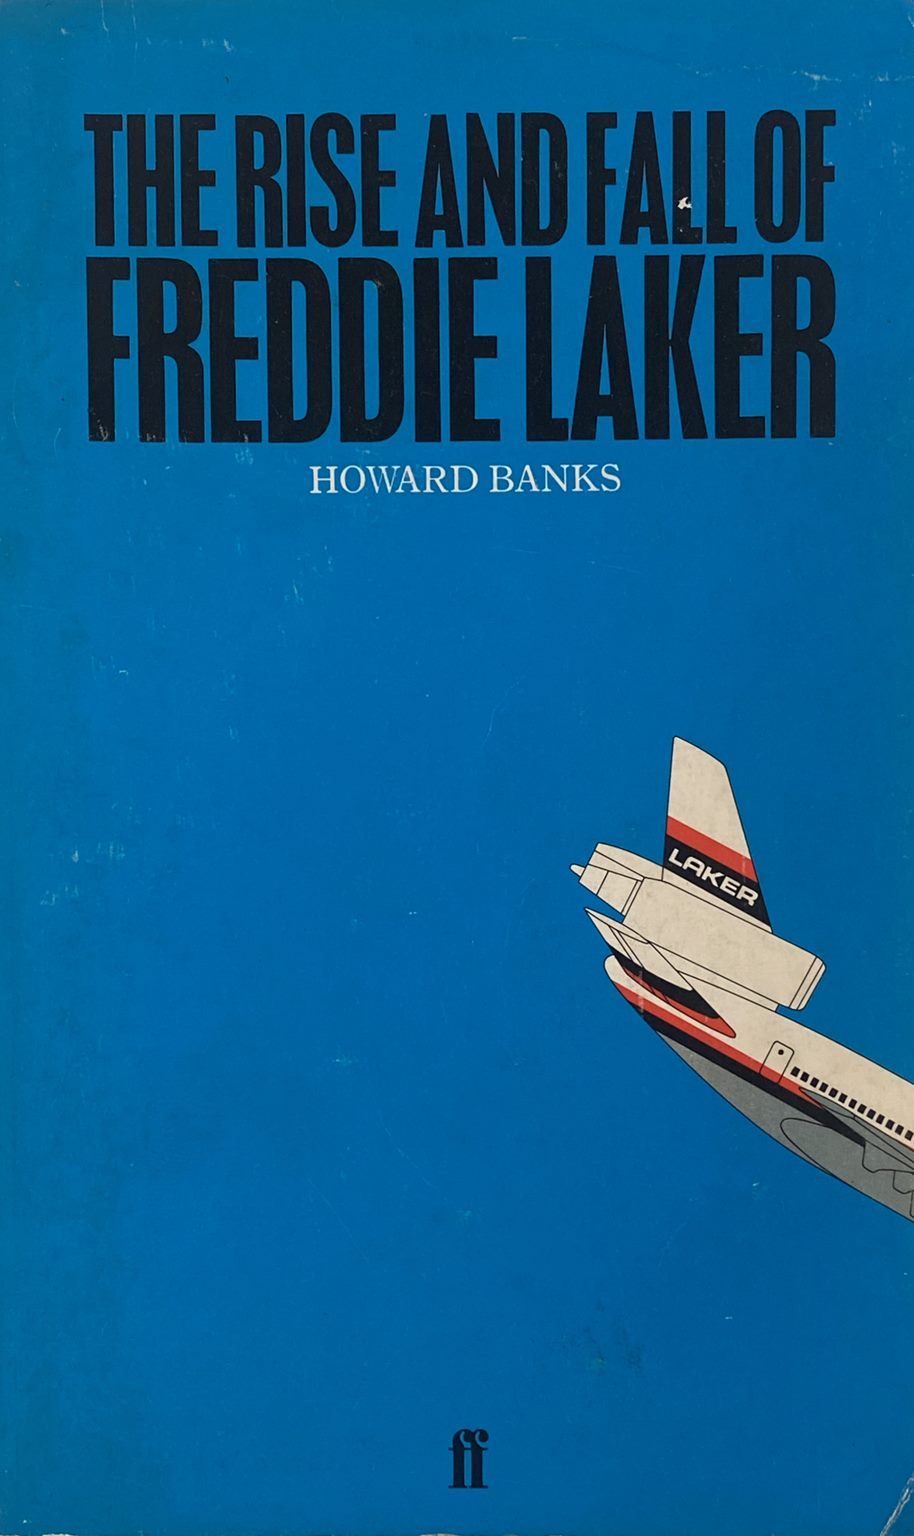 The Rise and Fall of FREDDIE LAKER